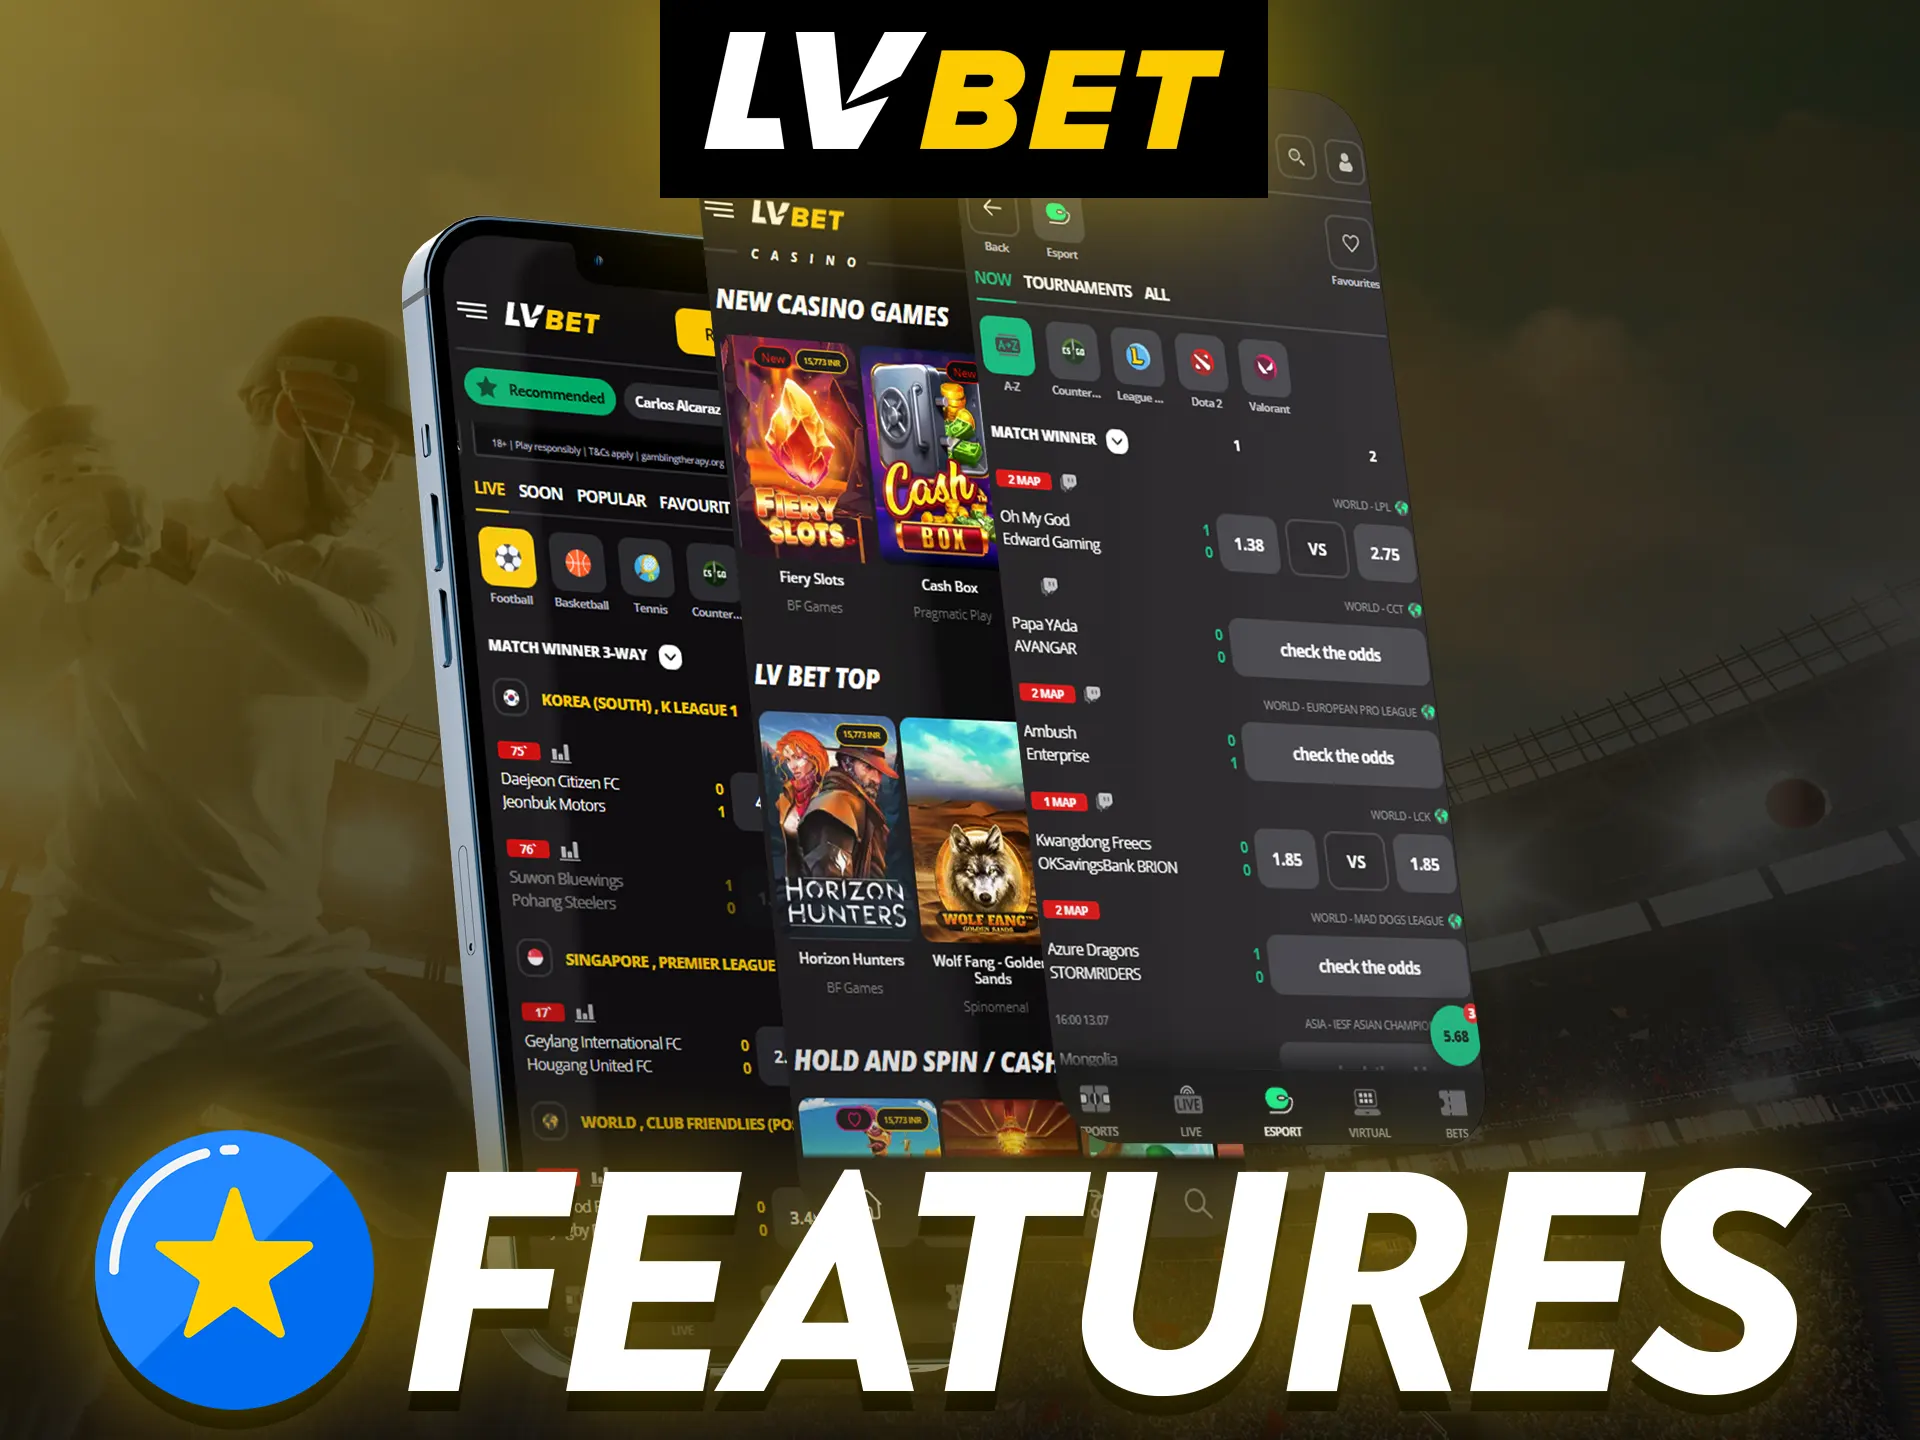 The LV Bet app has many handy and useful features.